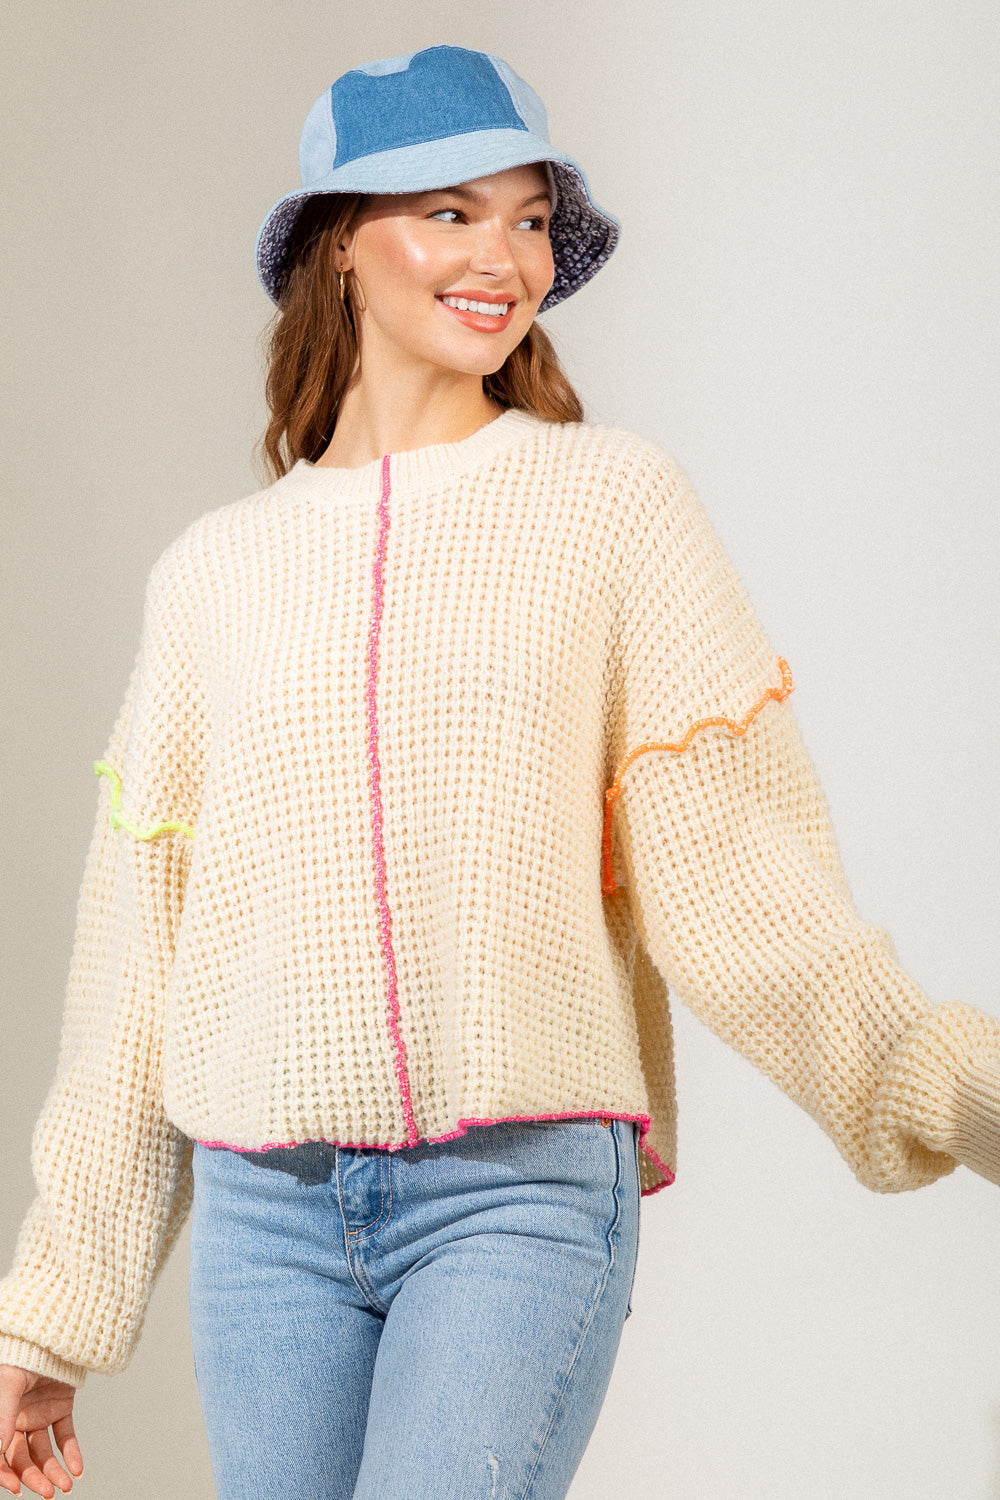 Cotton Candy Waffle Knit Top